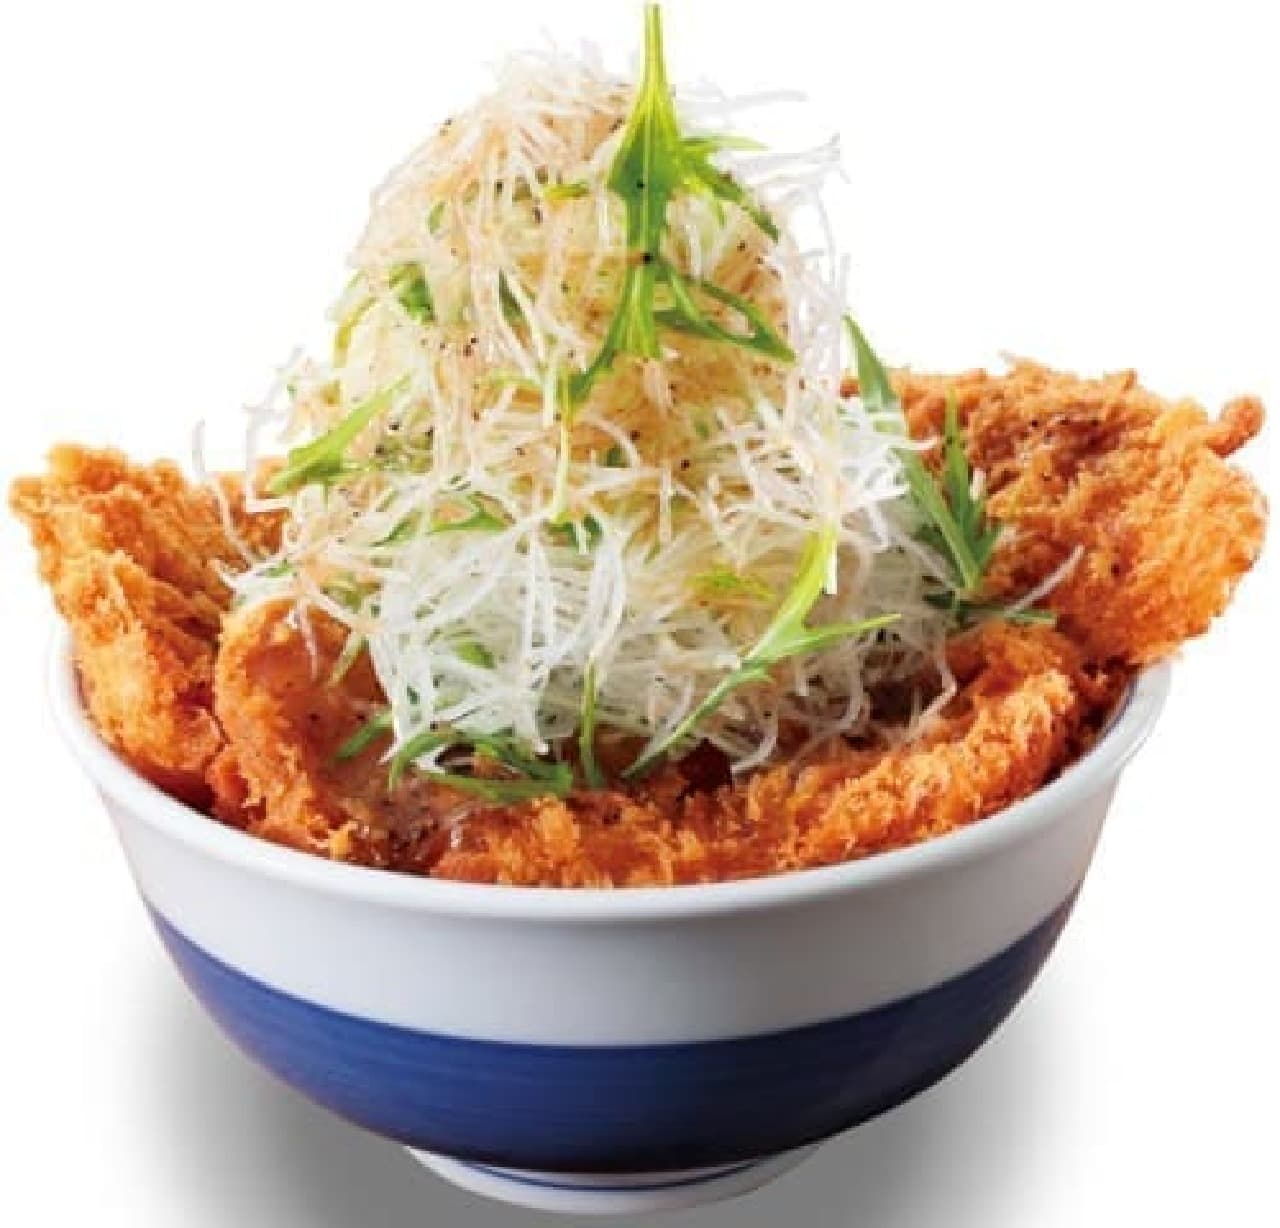 Katsuya "Chicken cutlet bowl with vegetables"